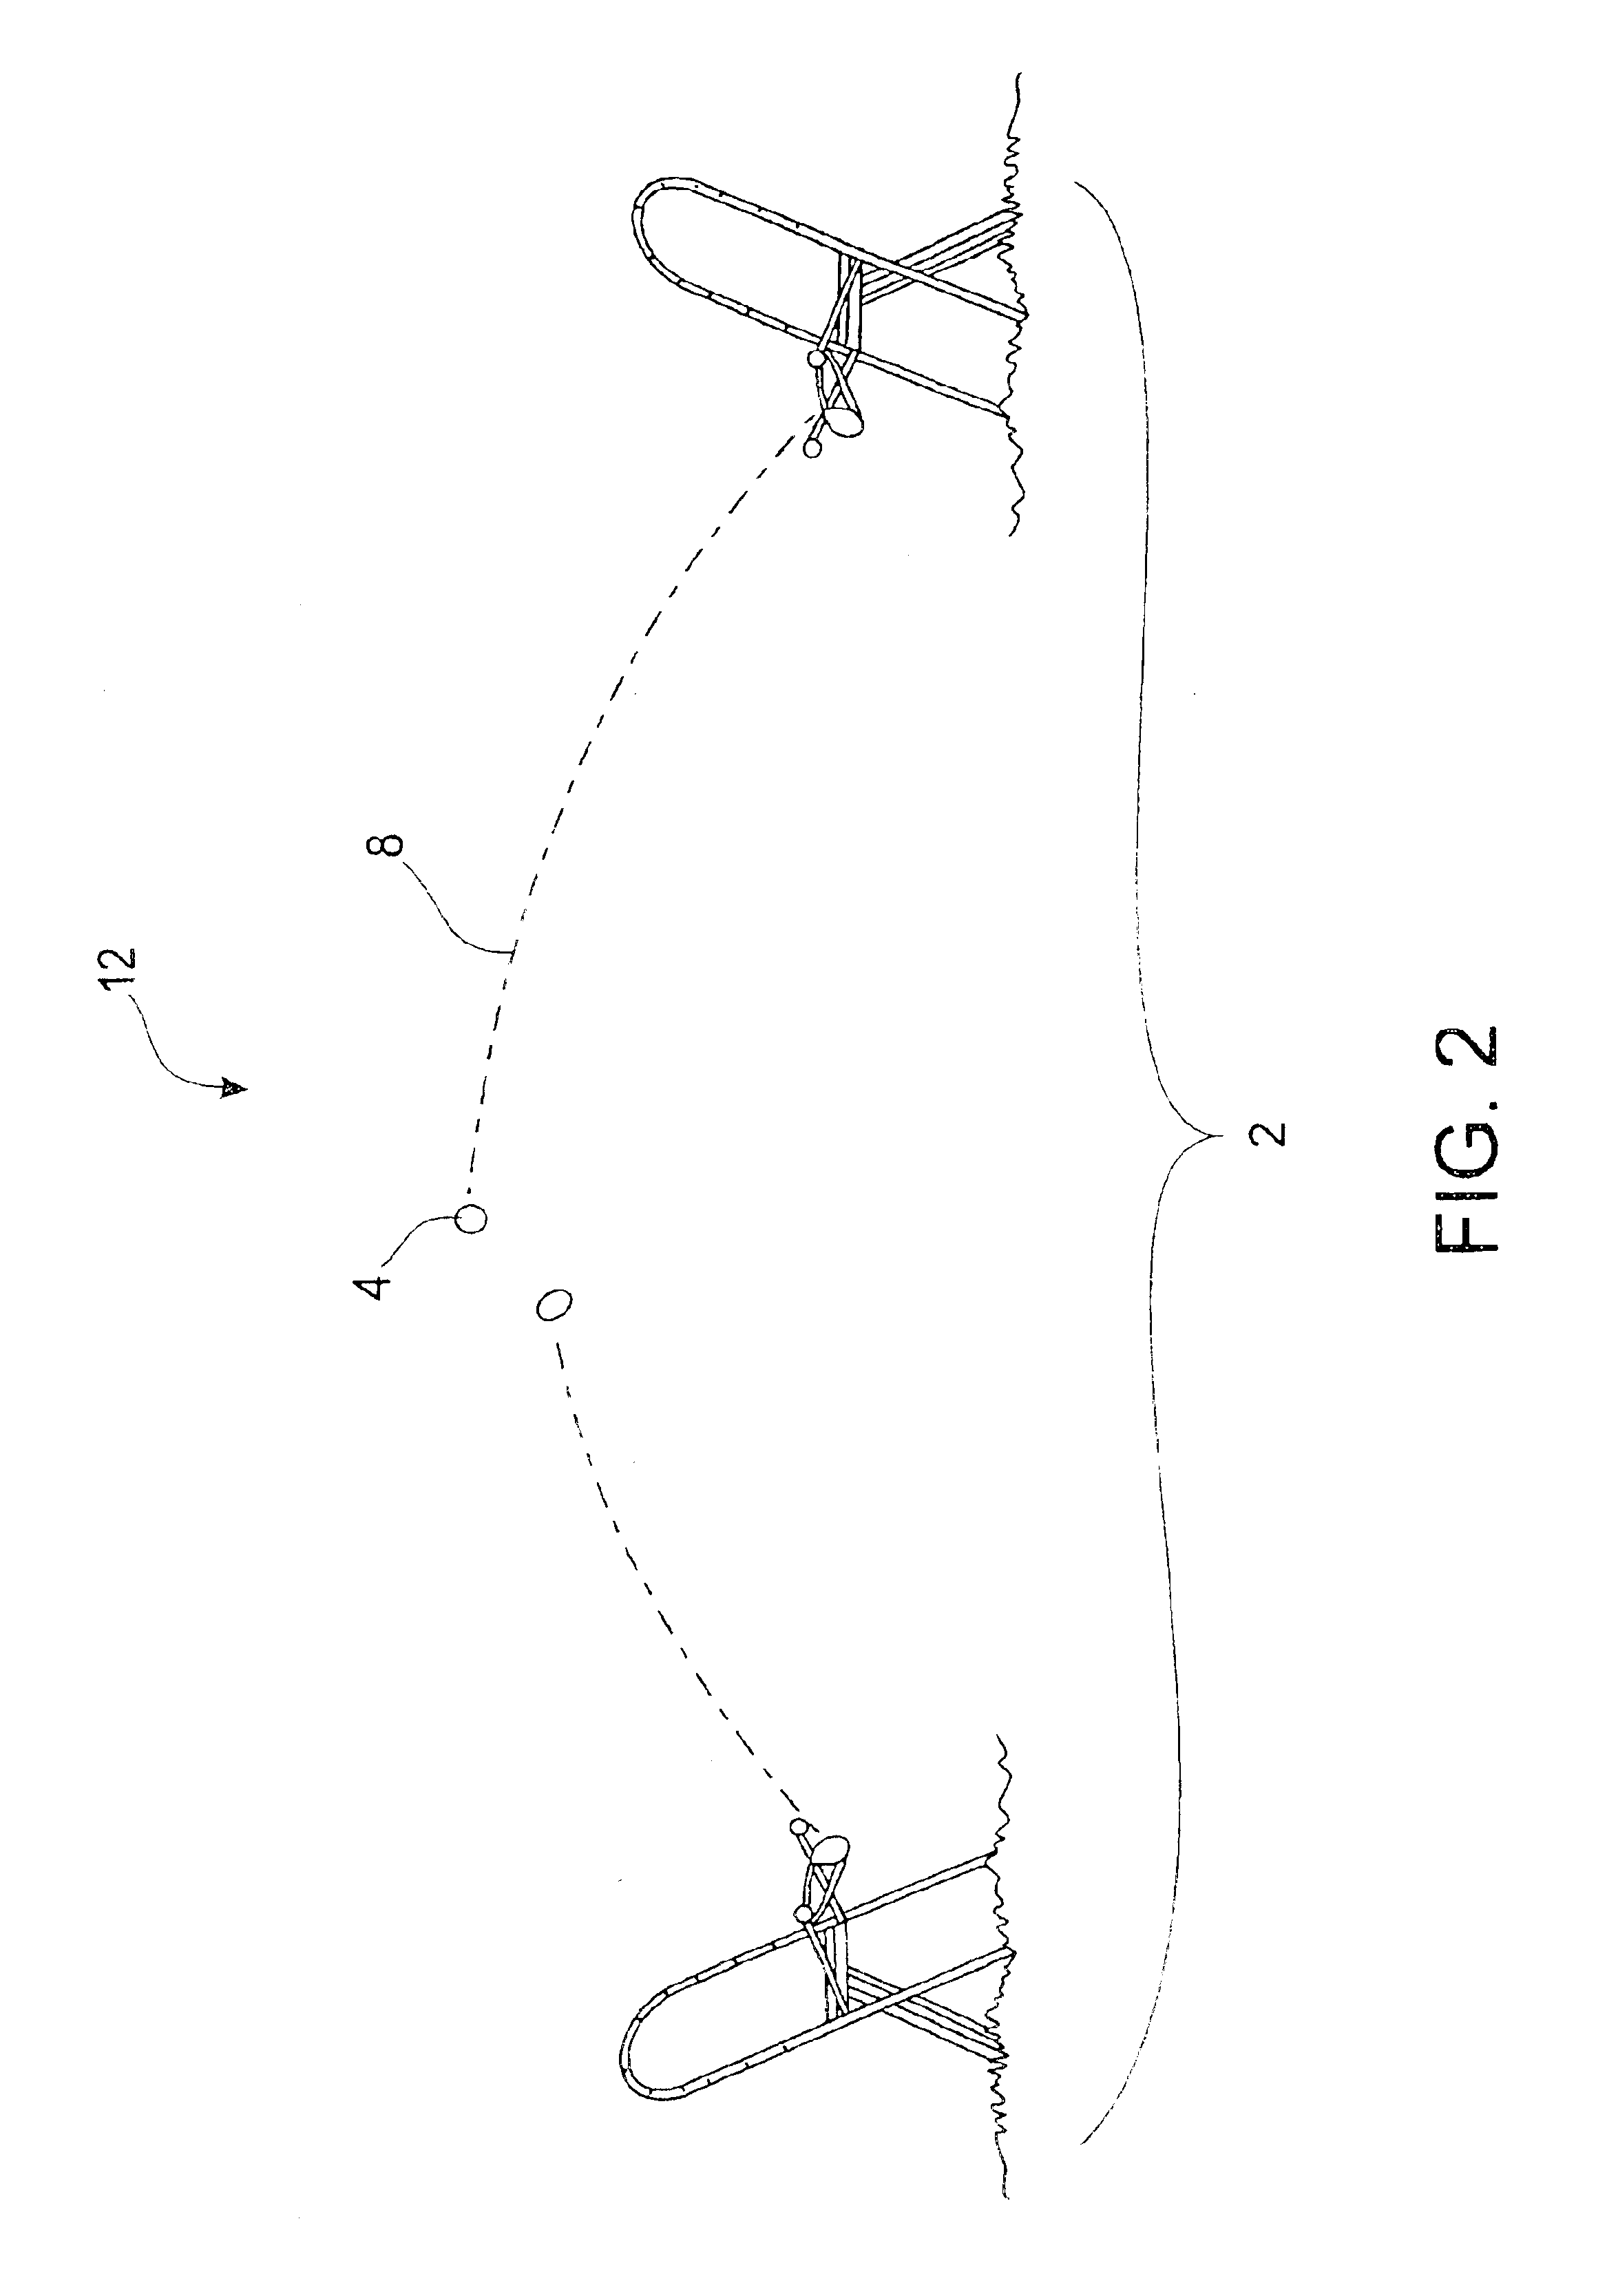 Launching game apparatus and method